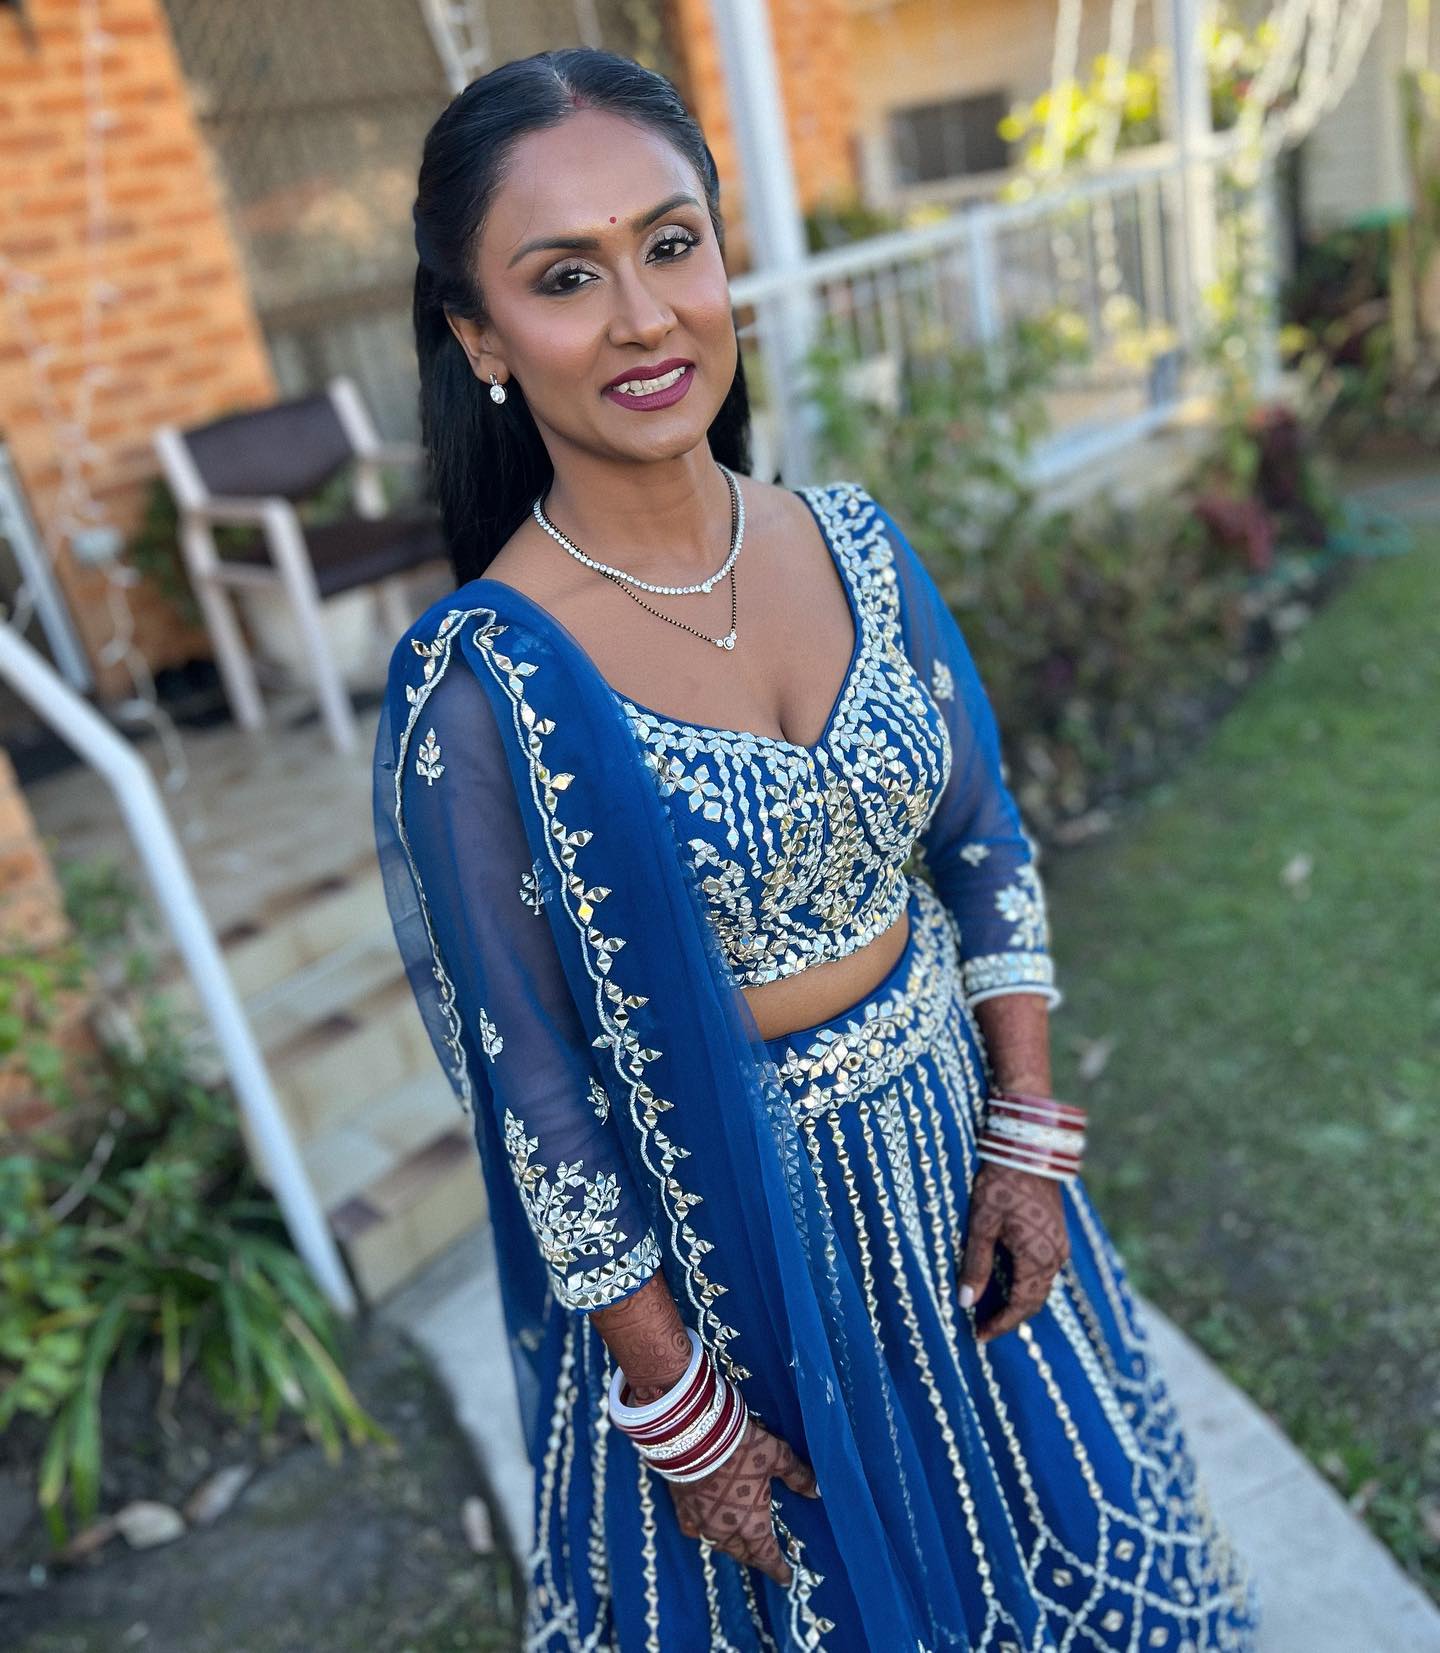 ✨ H E E N A ✨

Lovely @heen4_chauhan softly glammed up for her reception! 💙

👗 @payal_pasand_liverpool 
👐🏼 @hennabymeghapatel 
💄 Makeup, hair and bridal styling by @shellybhandarimakeup 

———————————————————————————
❗️Taking all 2022/2023 bridal and 2022 non-bridal bookings! Secure a booking for your next event via the link in my bio.
———————————————————————————
❗️1:1 Personal Makeup Lessons Now Available. Enquire via the website in bio for more information.
———————————————————————————
#makeupartistsydney  #sydneymakeupartist #sydneymakeupartists  #100wattskin #glowyskin #maccosmetics #bridalmakeup #brideoftheday #glammakeup #indianwedding #weddingmakeup #indianbride #reelitfeelit 
 #maccosmetics #glowingbride #dewyskin #southasianweddings #toptags #bride #glameyes #ootd #photoshoot #instafashion #morningbride #makeup #indianbride #dulhan #sydneybridalmakeup #weddingsutra #indianbridalmakeup #indianbridalmakeupsydney